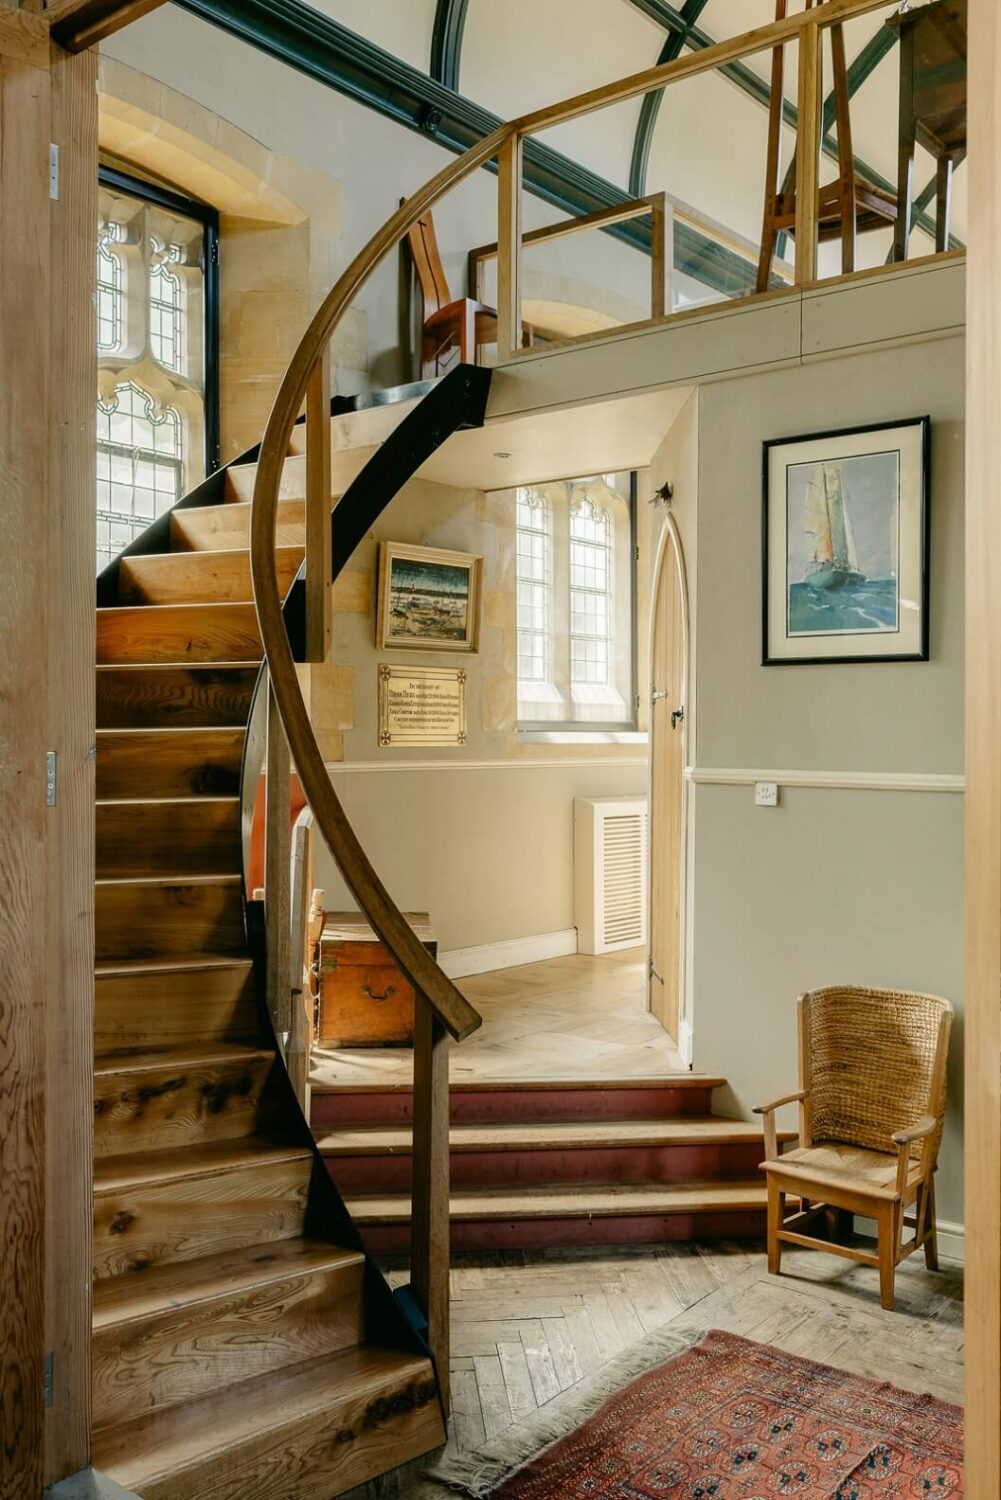 round-wooden-staircase-church-conversion-england-nordroom